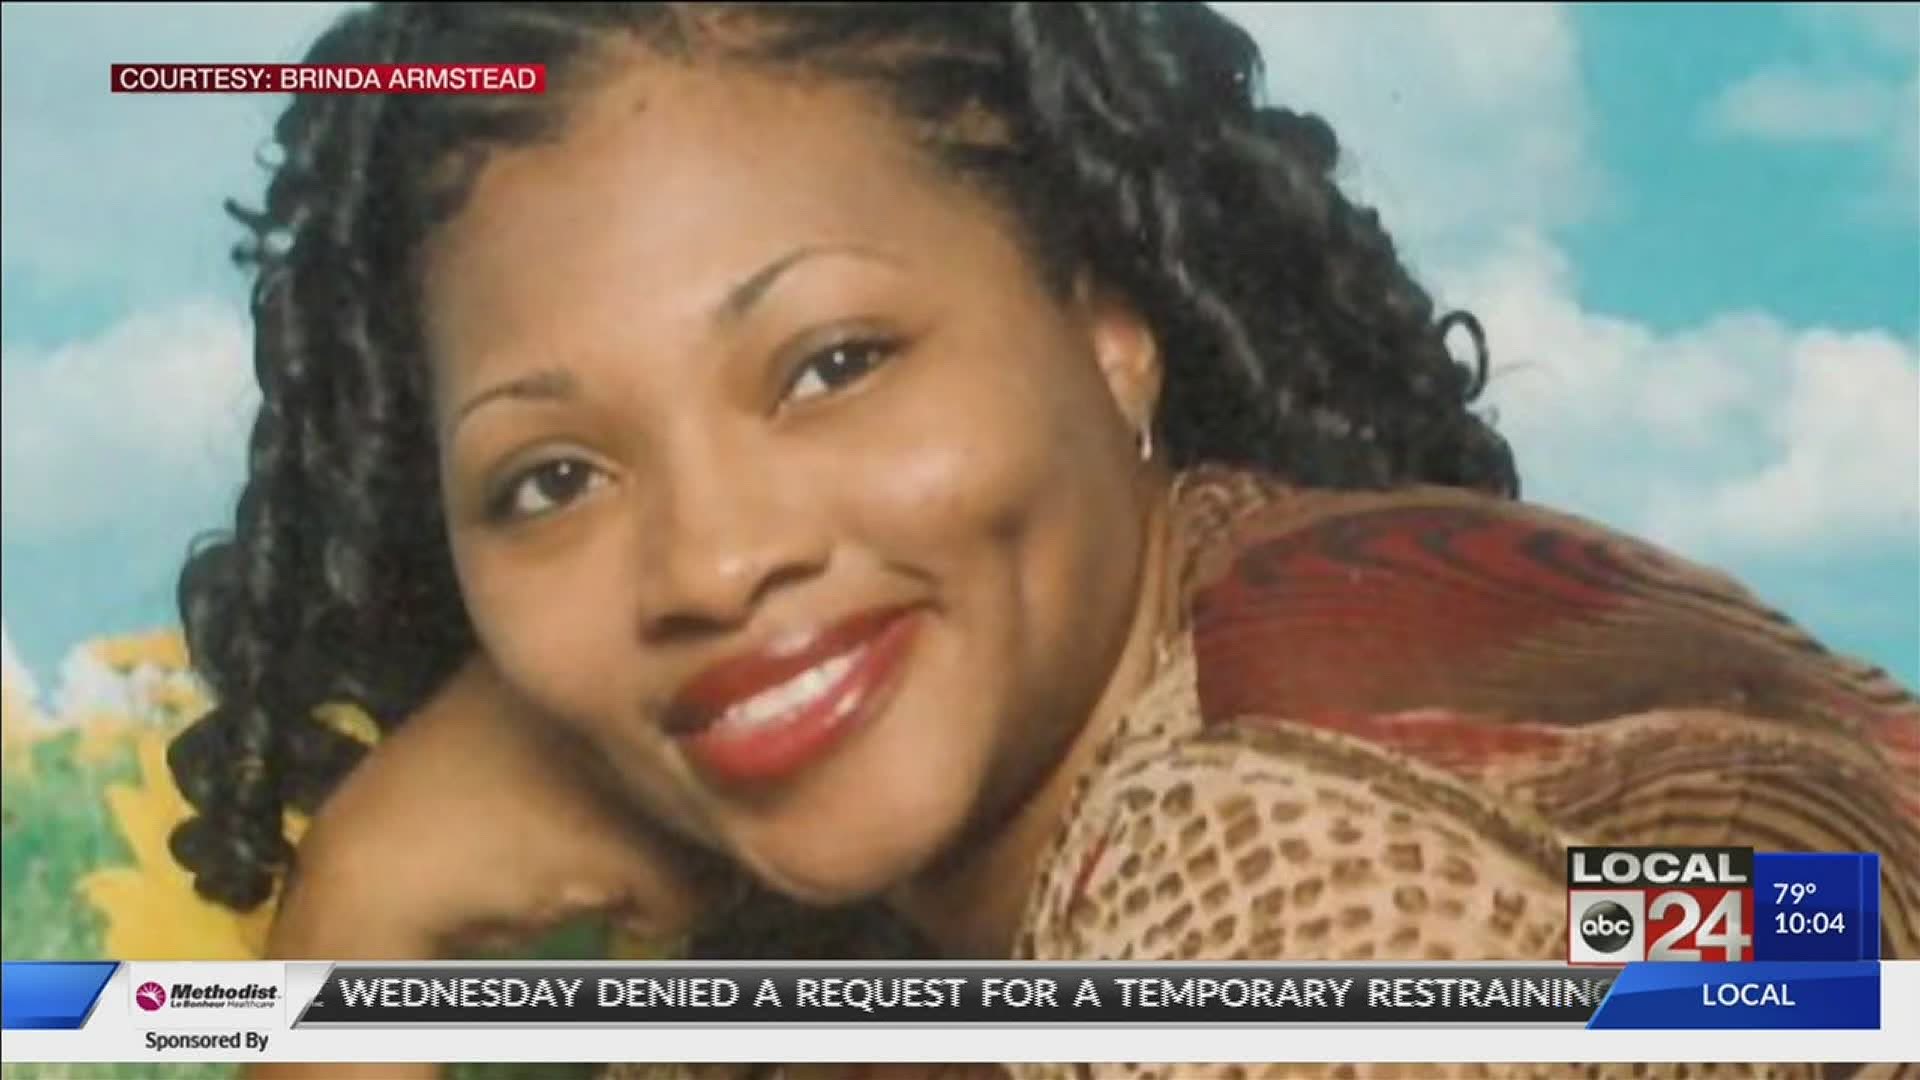 Latrice Armstead was last seen in Memphis with her estranged husband, who had a history of abusive behavior.